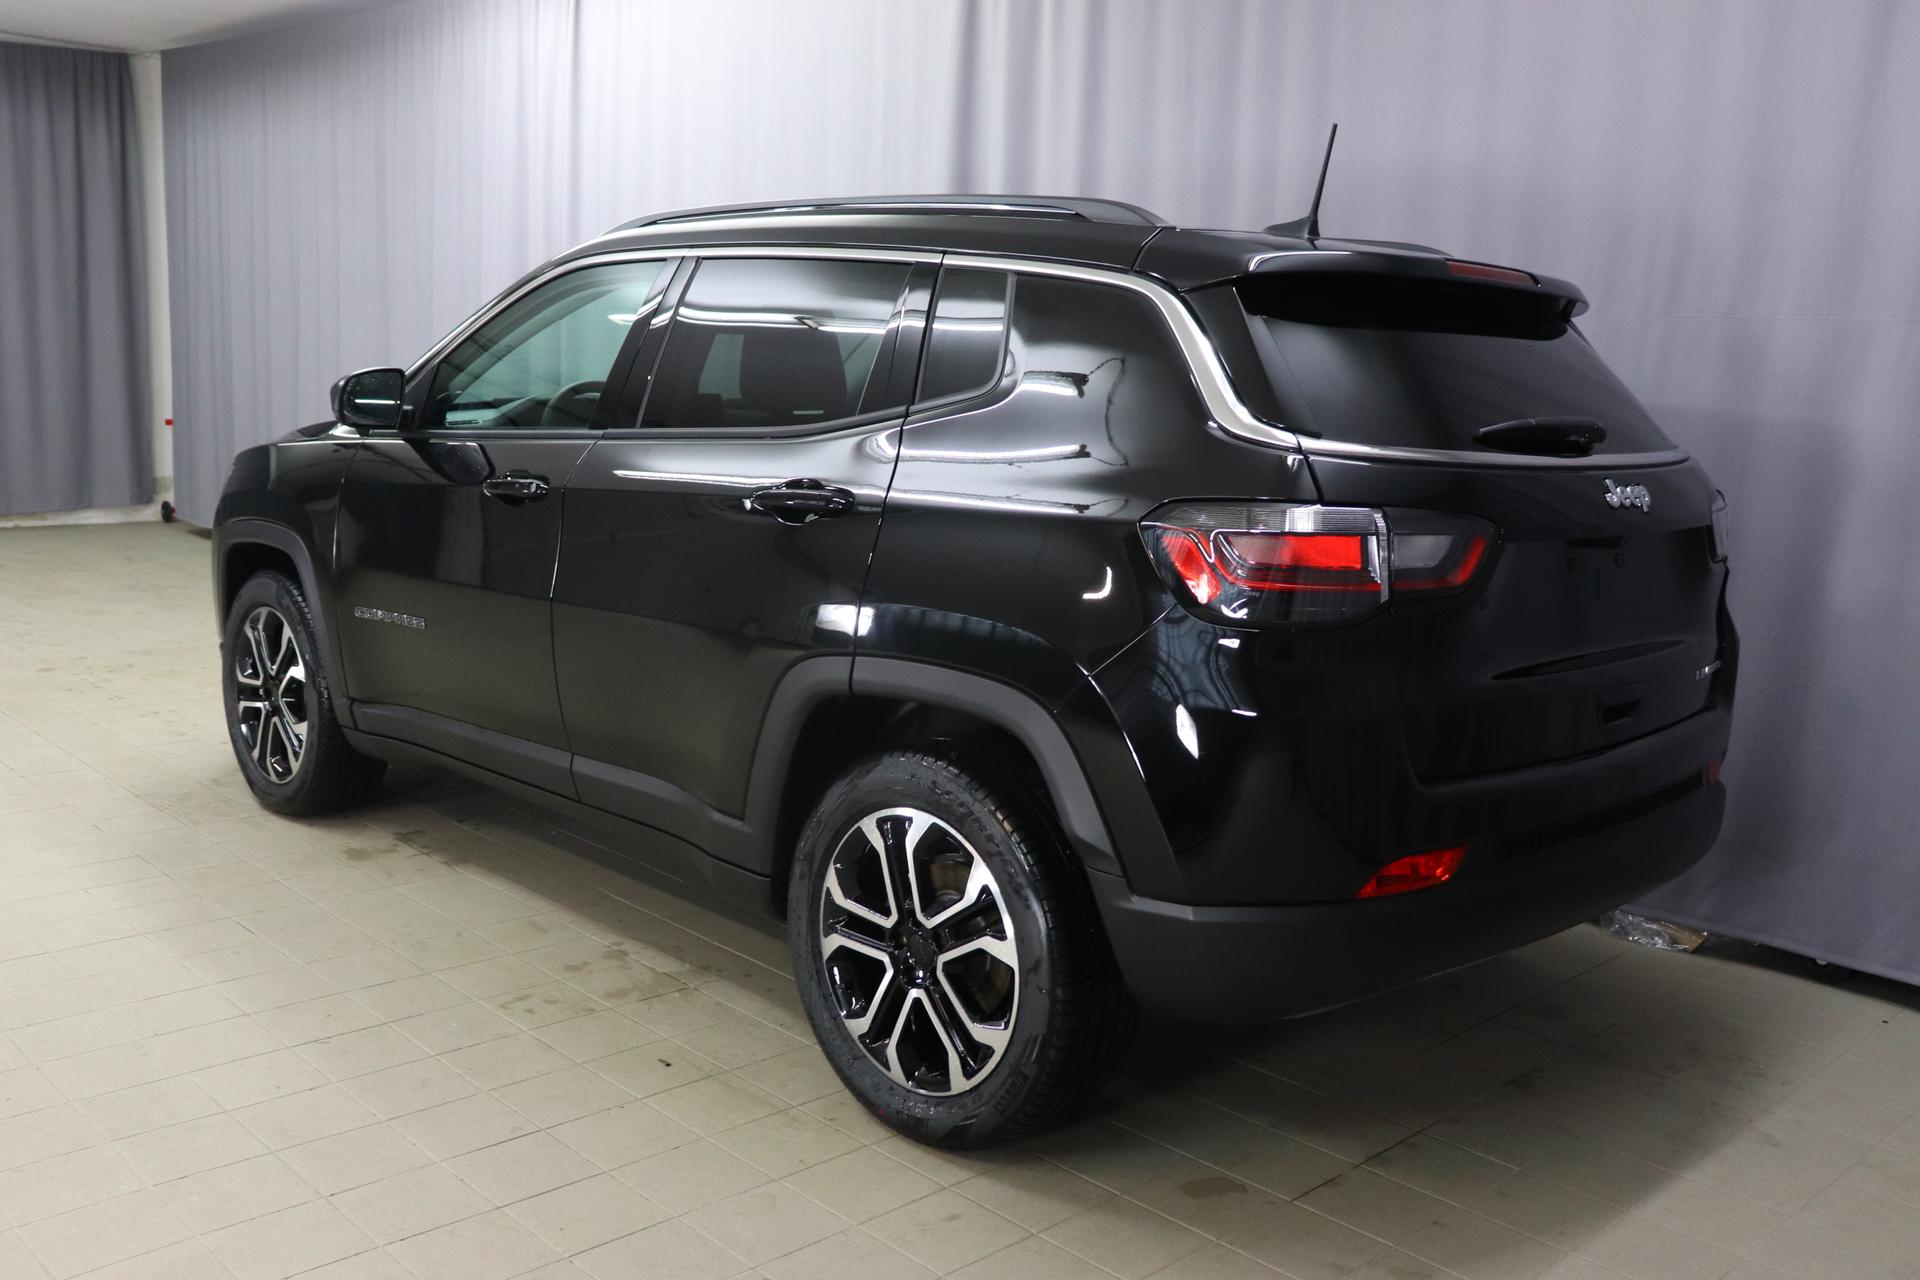 Jeep Compass 1.3 MultiAir T4 130 MT FWD Limited			601 - Solid Black